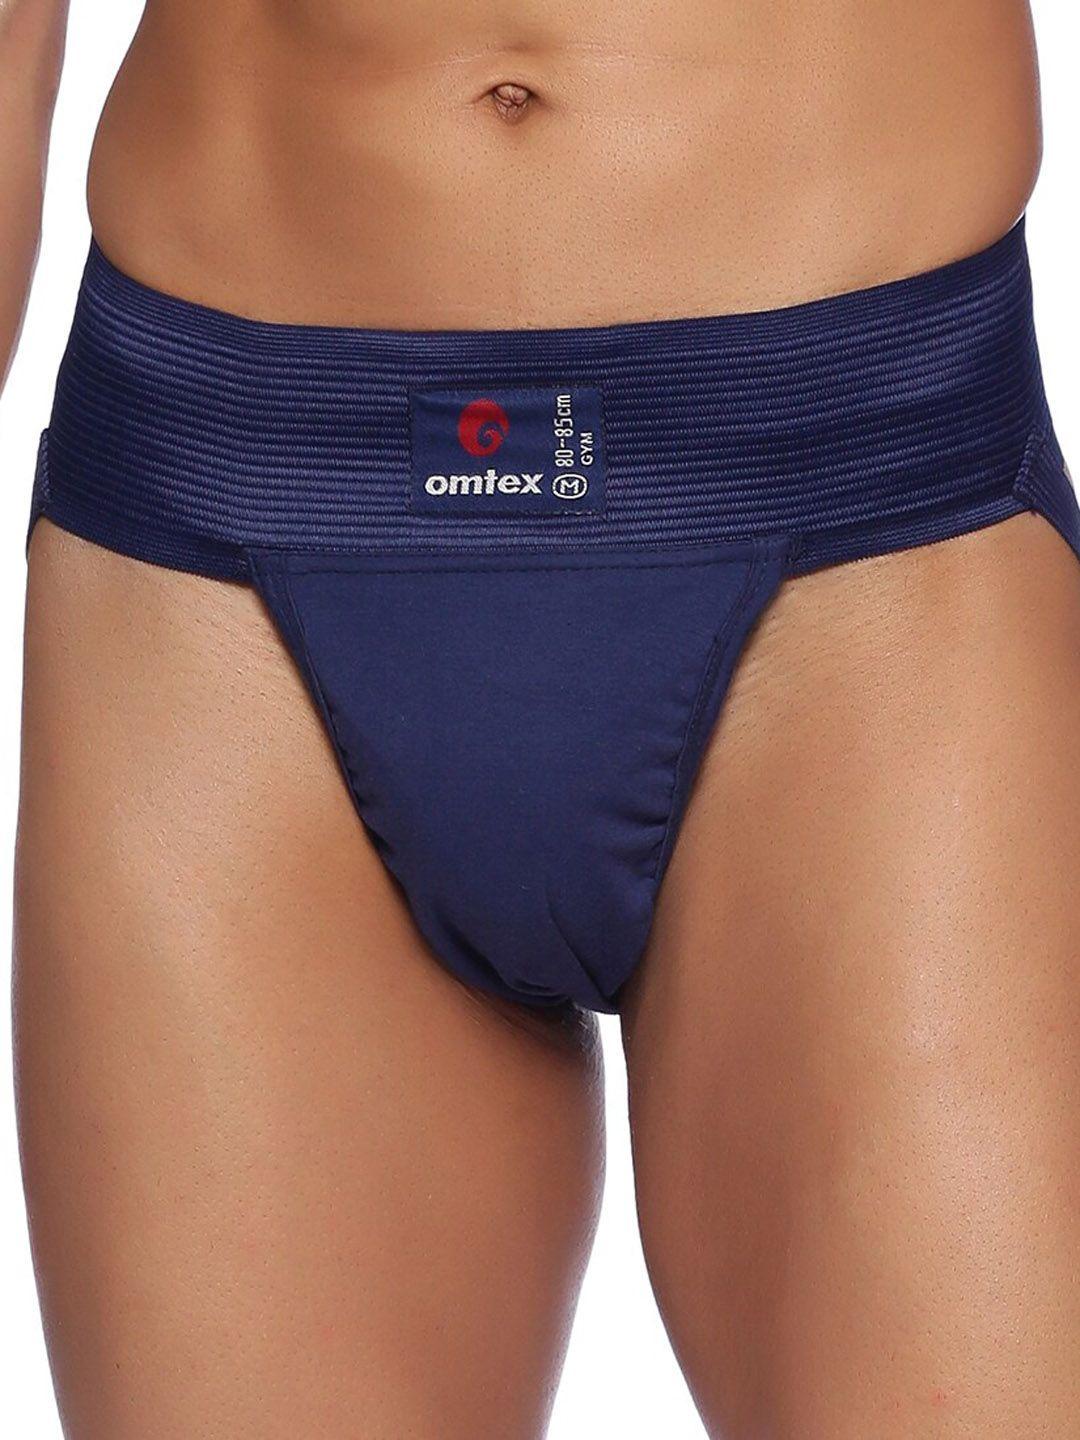 Omtex Athletic Gym Stretchable Supporter Jockstraps with Cup Pocket Briefs GymNBL